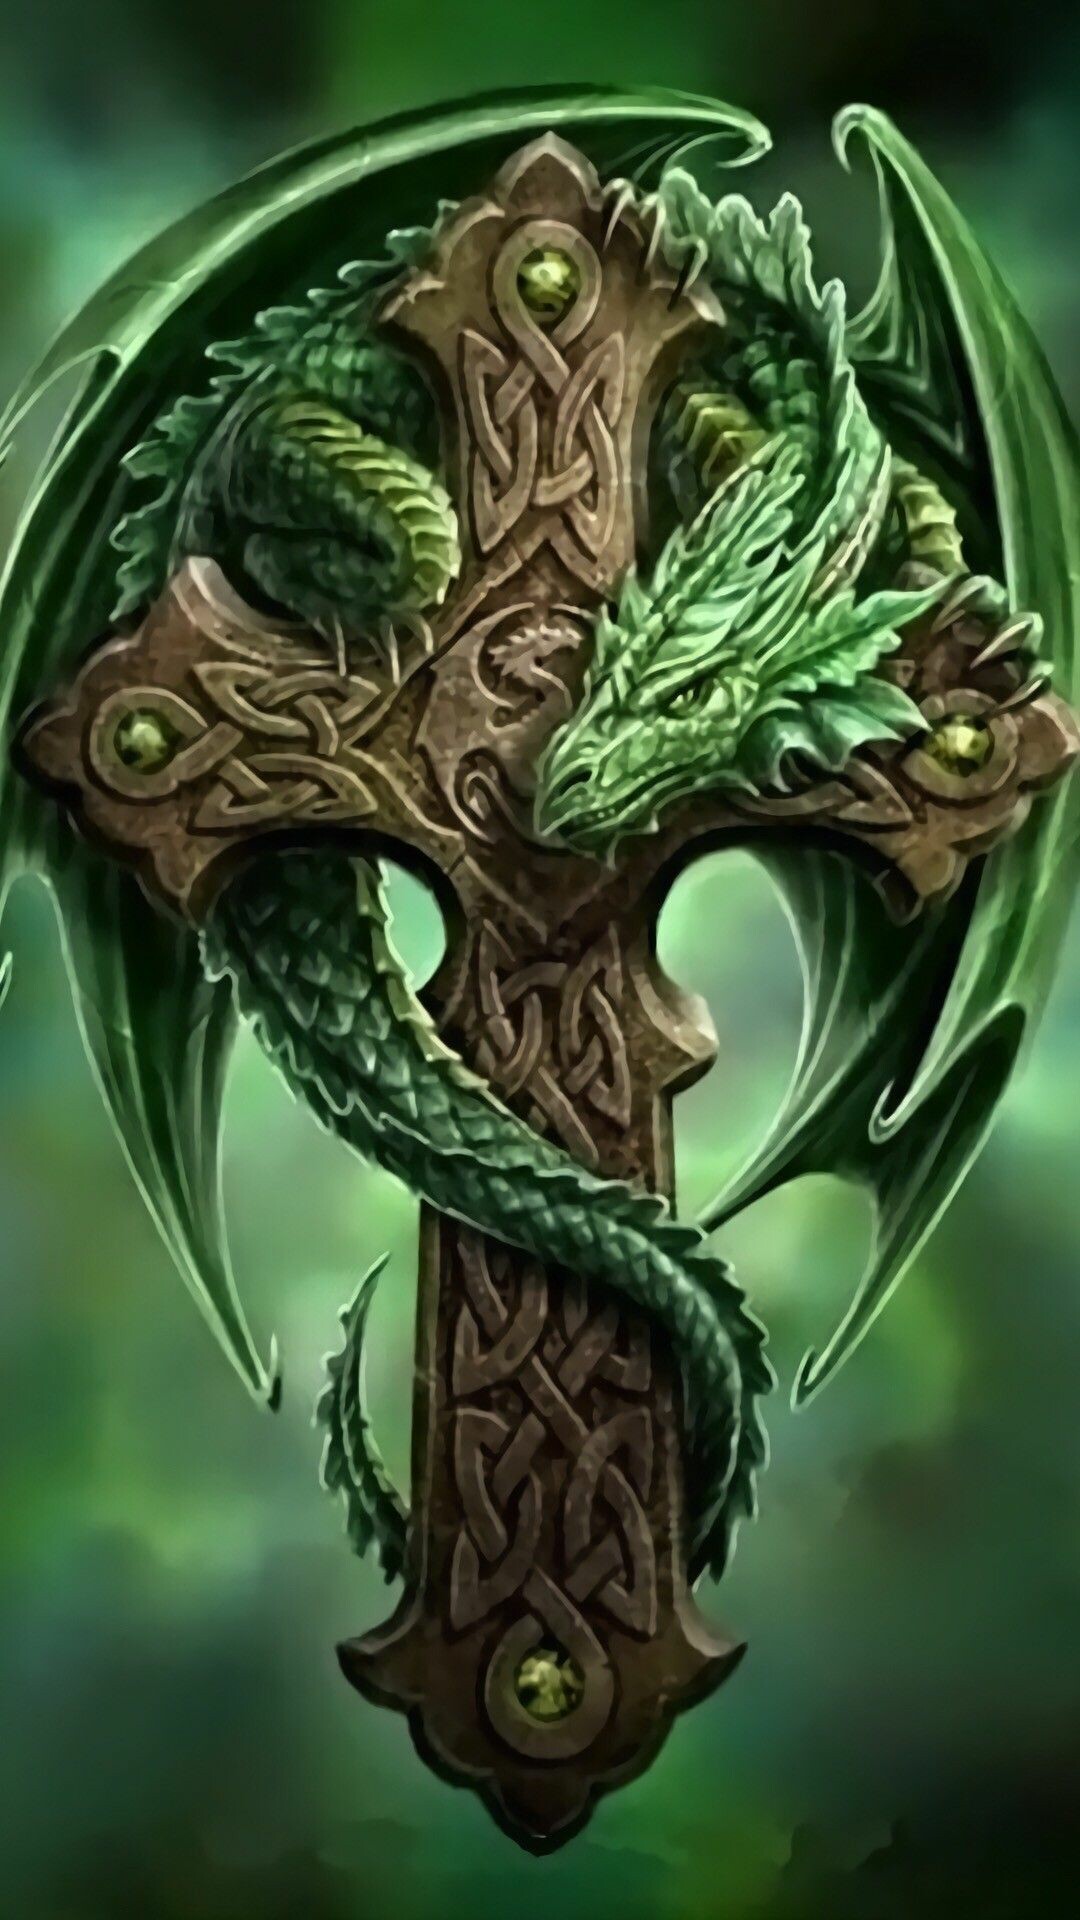 HD wallpaper, Intricate Designs, Historical Symbolism, Celtic Art, Samsung Full Hd Dragon Wallpaper Image, Mythical Creatures, 1080X1920 Full Hd Phone